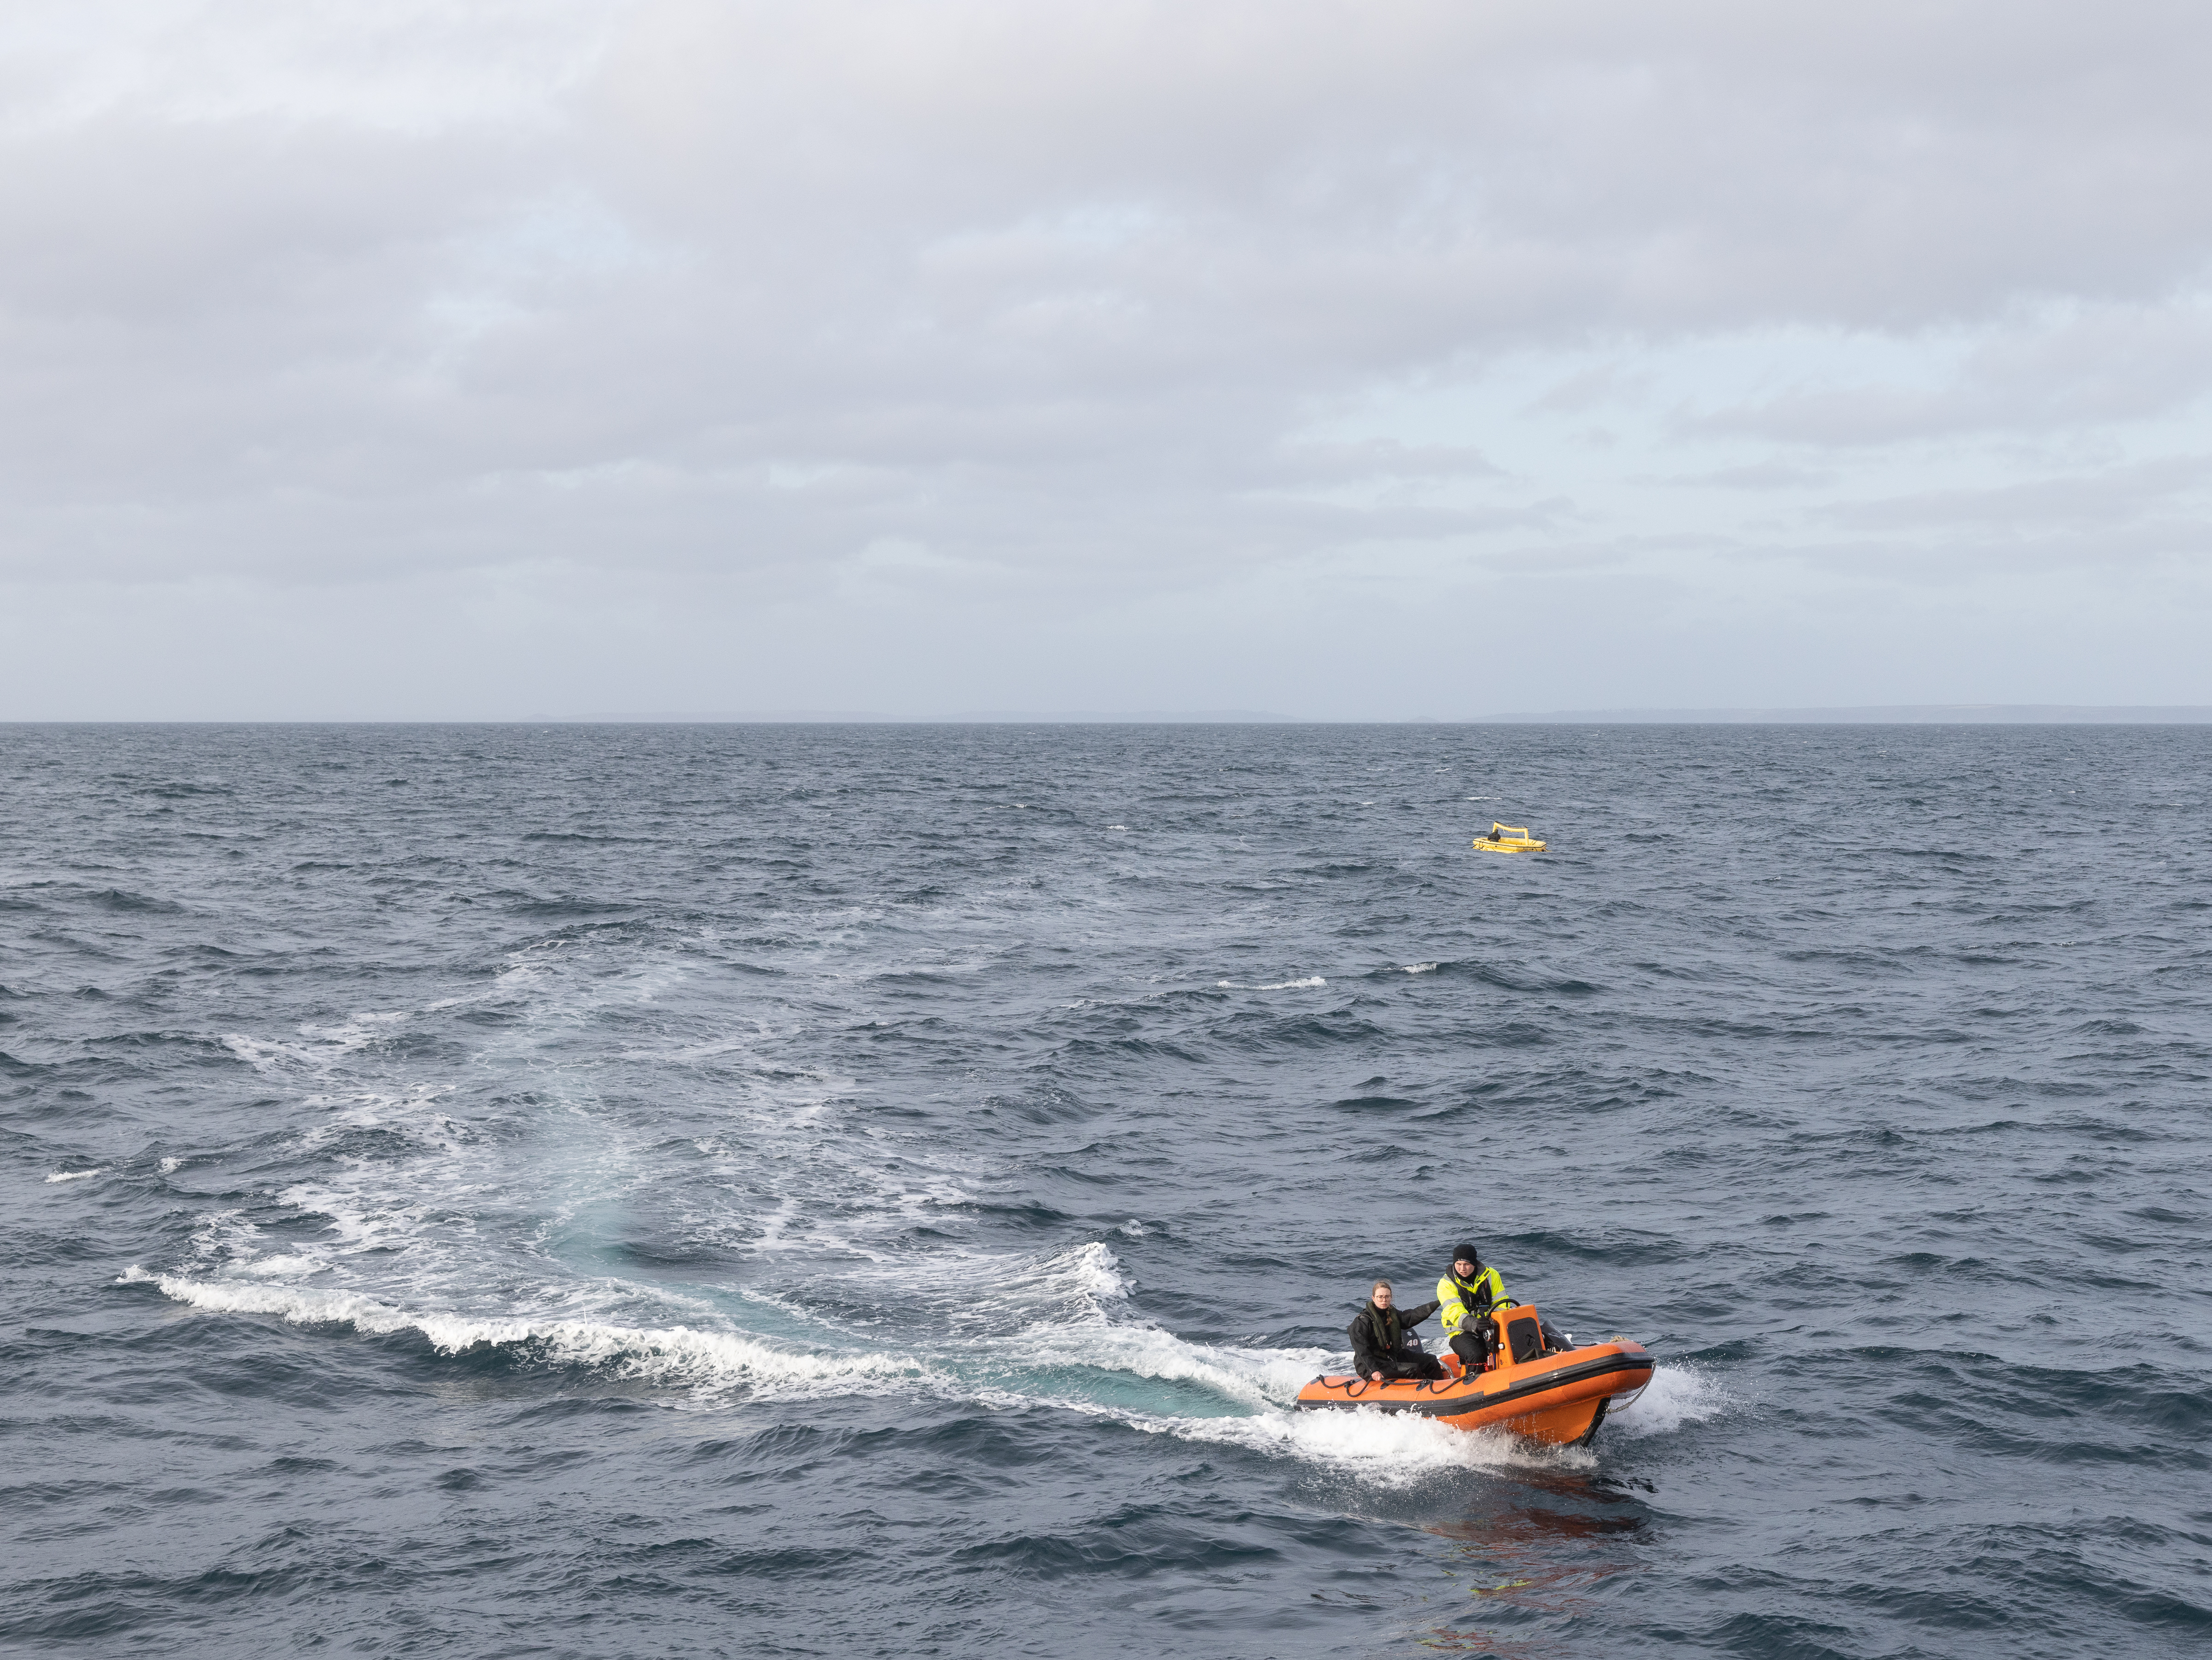 Image shows RAF Search and Rescue lifeboat in the sea.